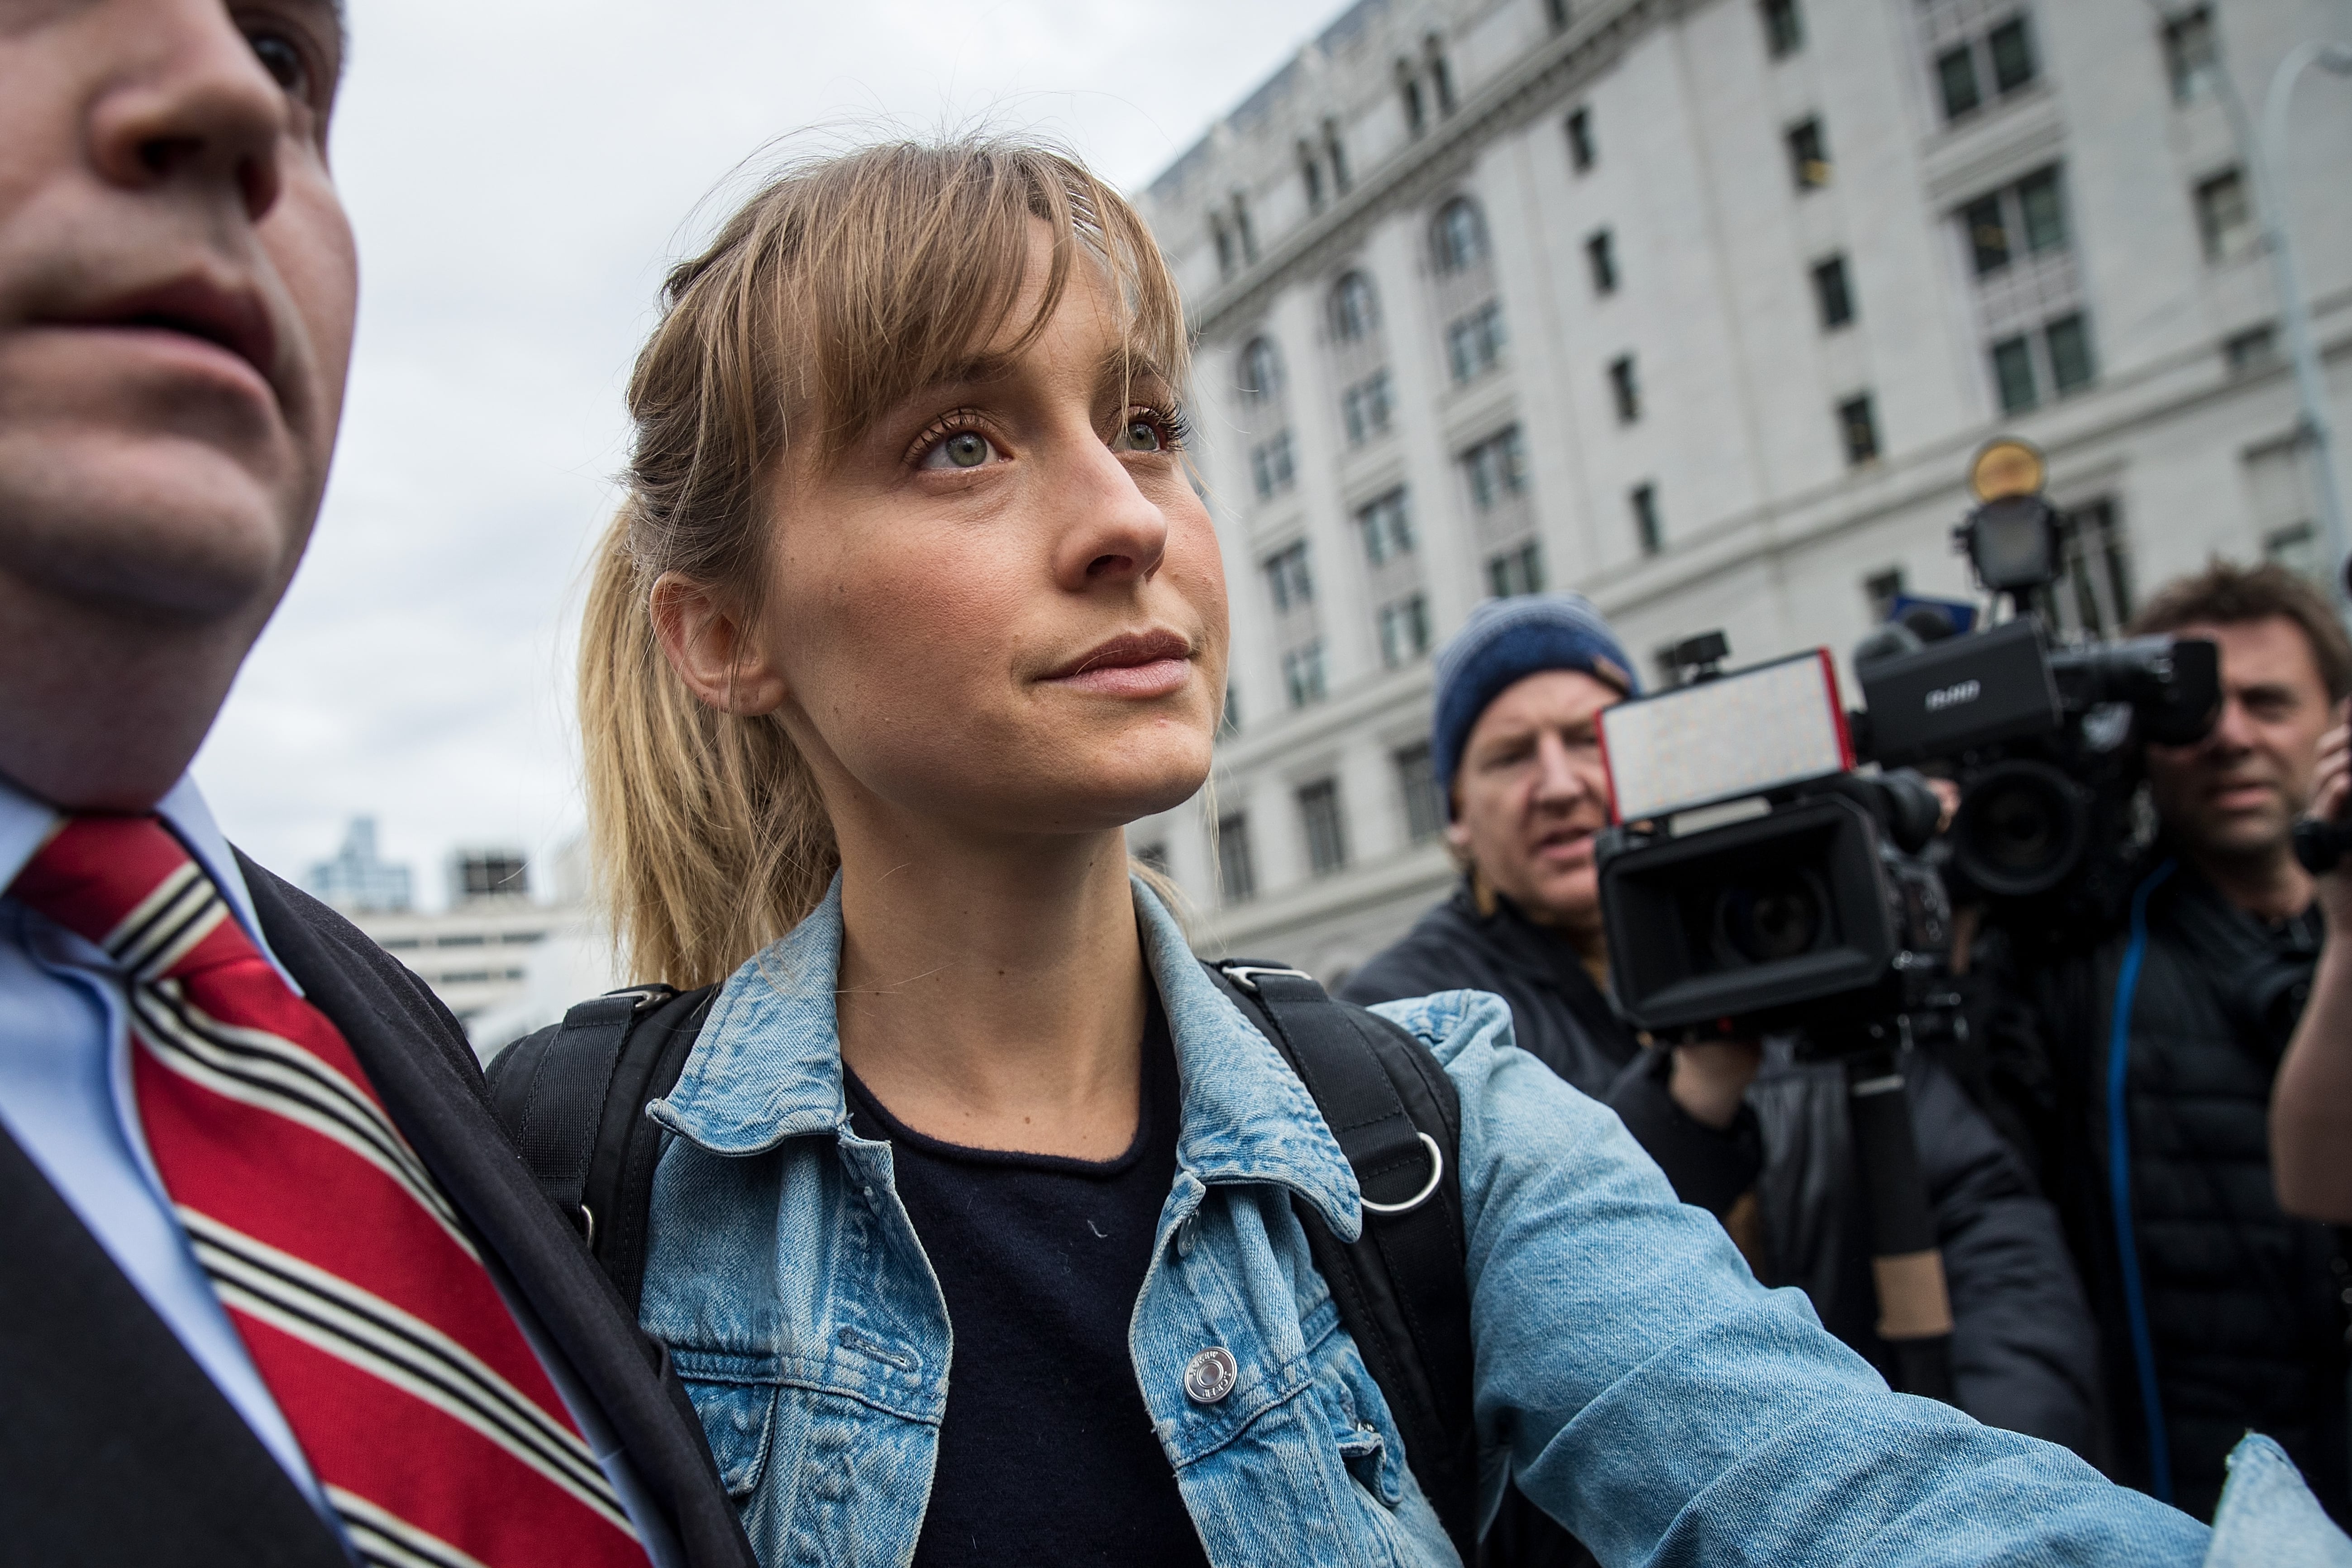 Allison Mack, Who Recruited Women For NXIVM, Released Early From Prison